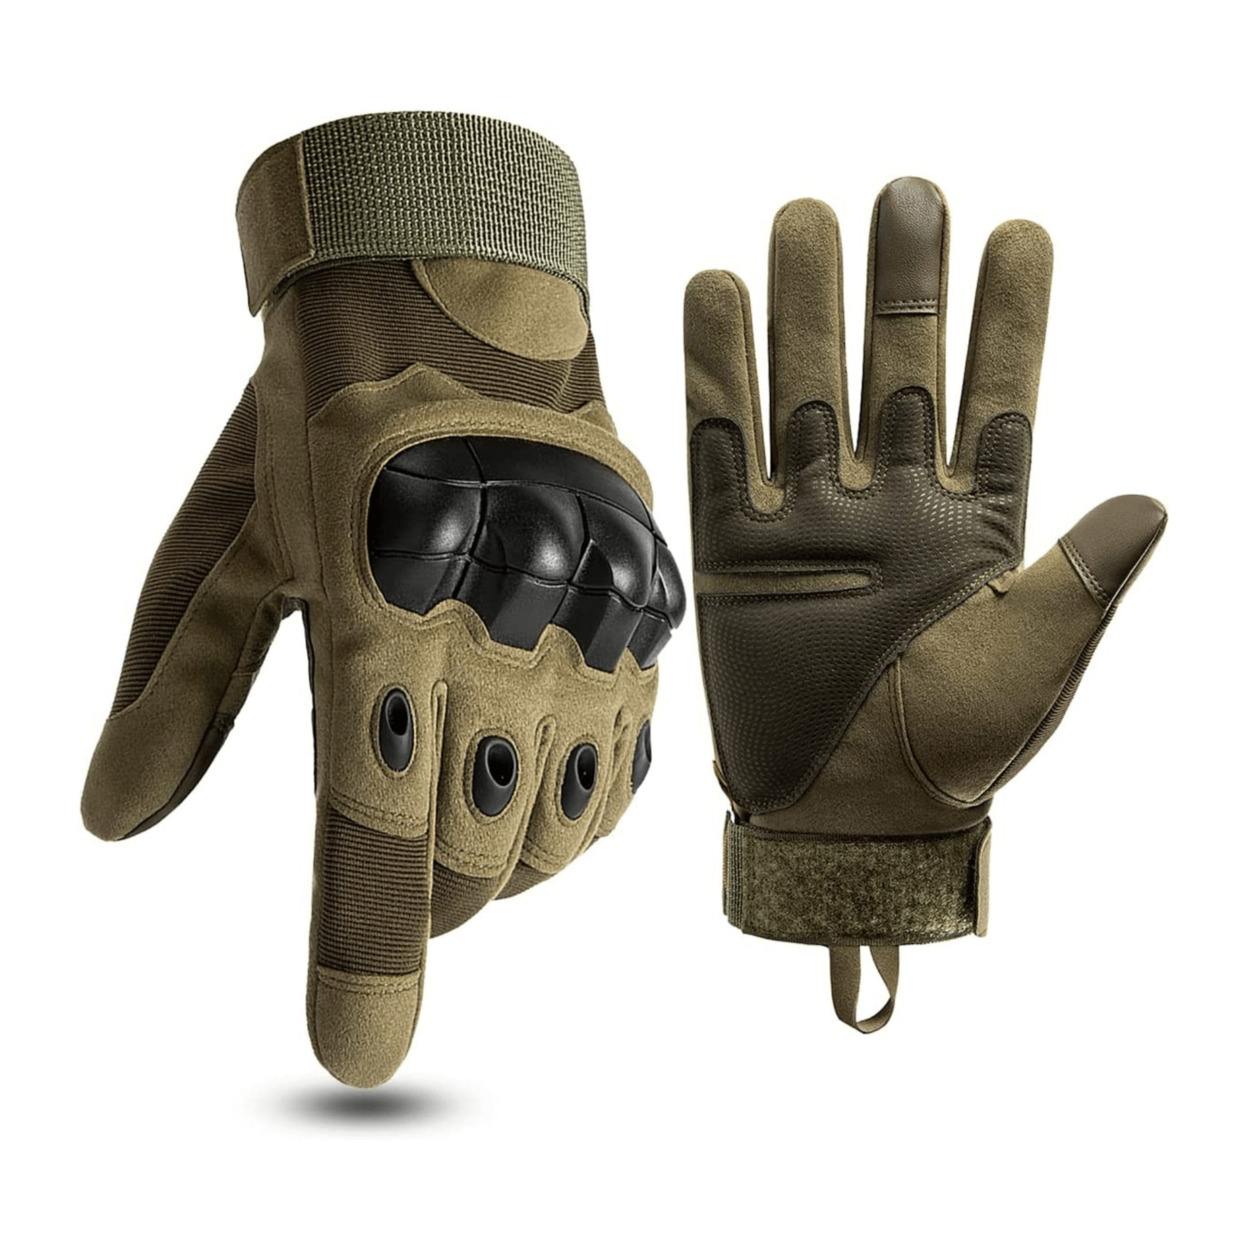 Tactical Military Airsoft Gloves For Outdoor Sports, Paintball, And Motorcycling With Touchscreen Fingertip Capability - Tan, X-Large